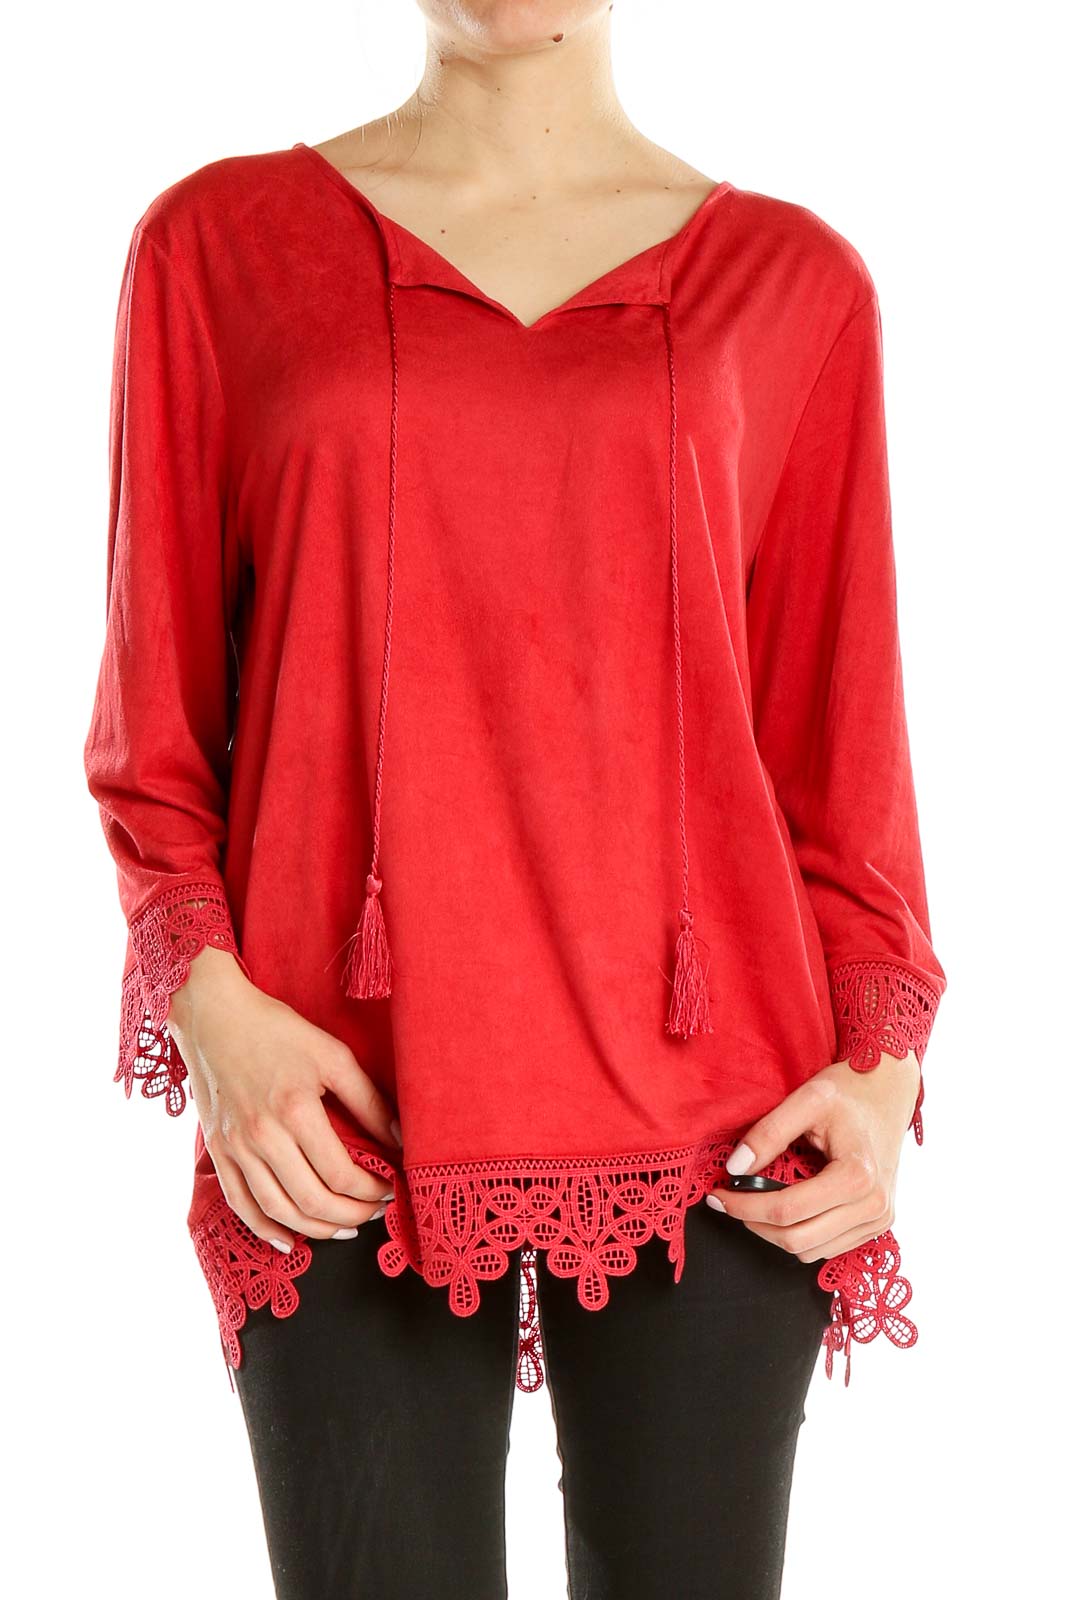 Red Lace Trim Top Front